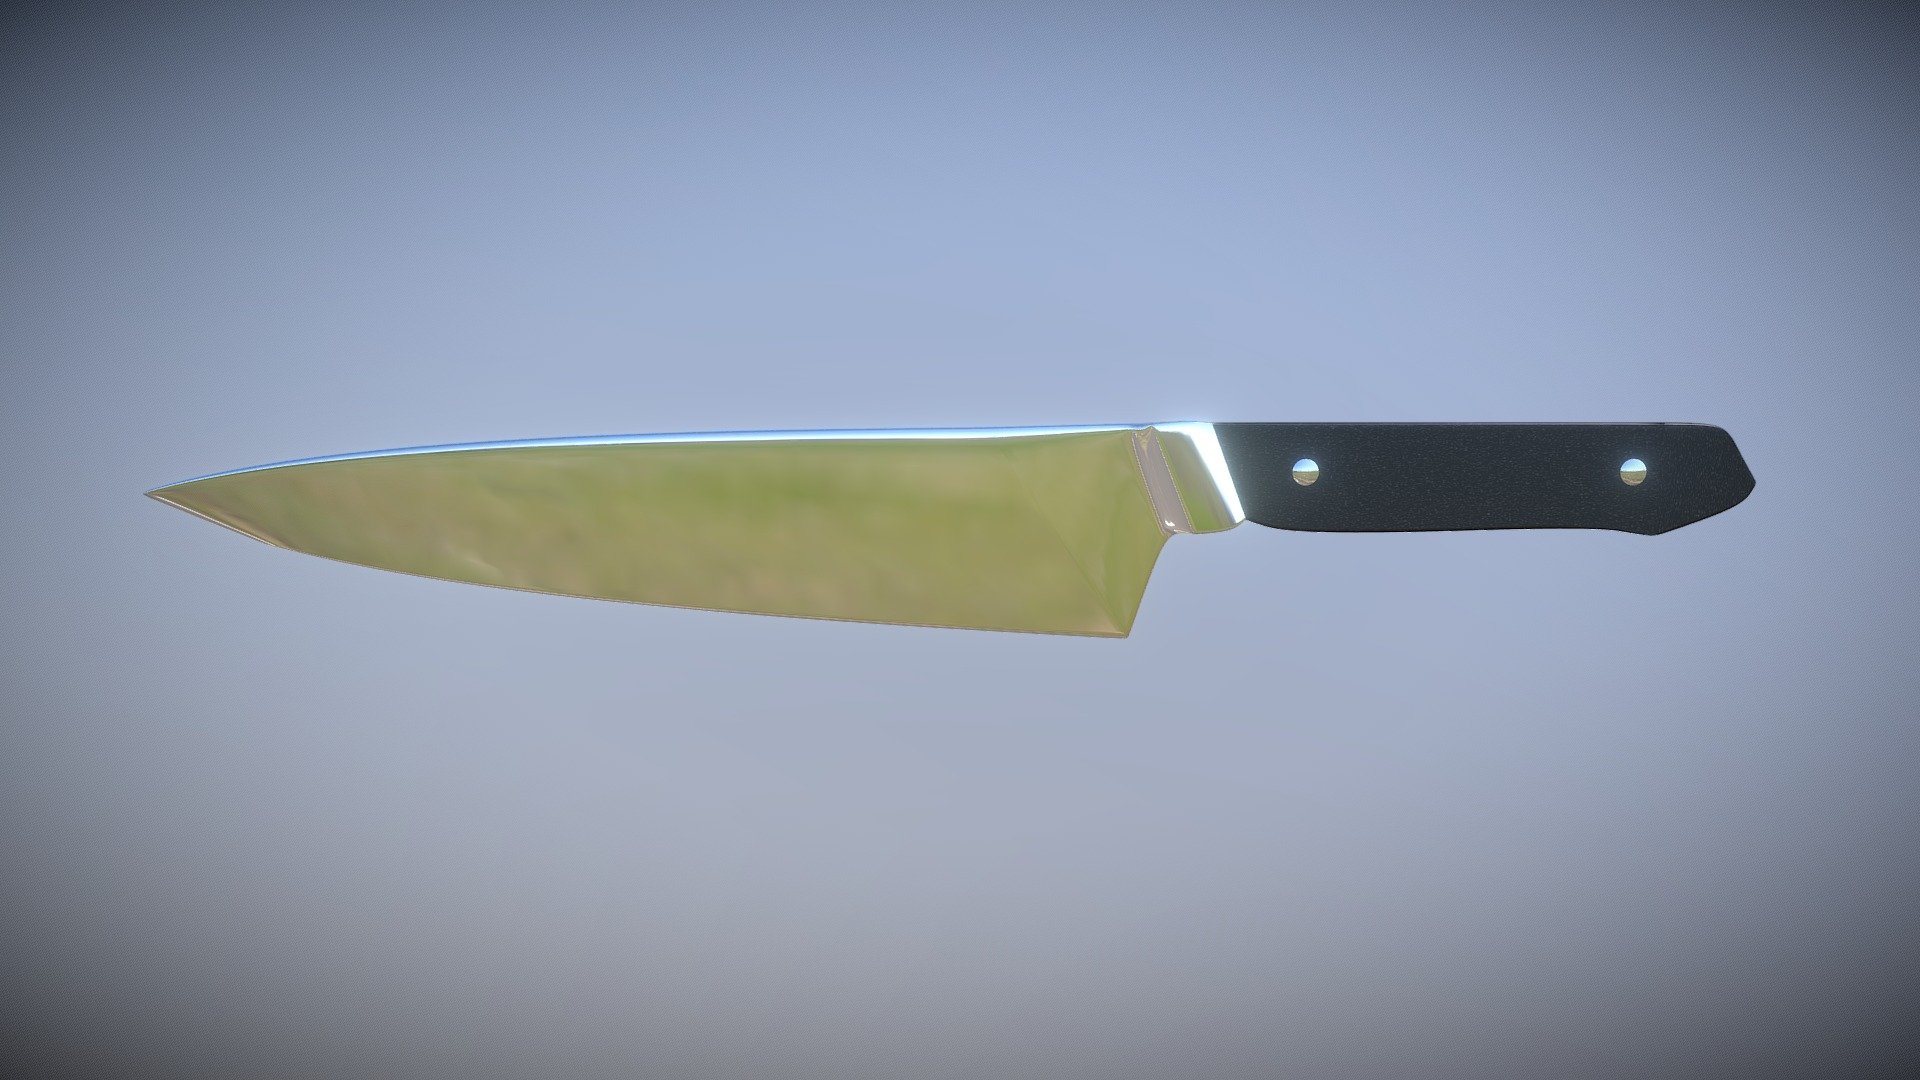 Just a simple knife, not too detailed 3d model